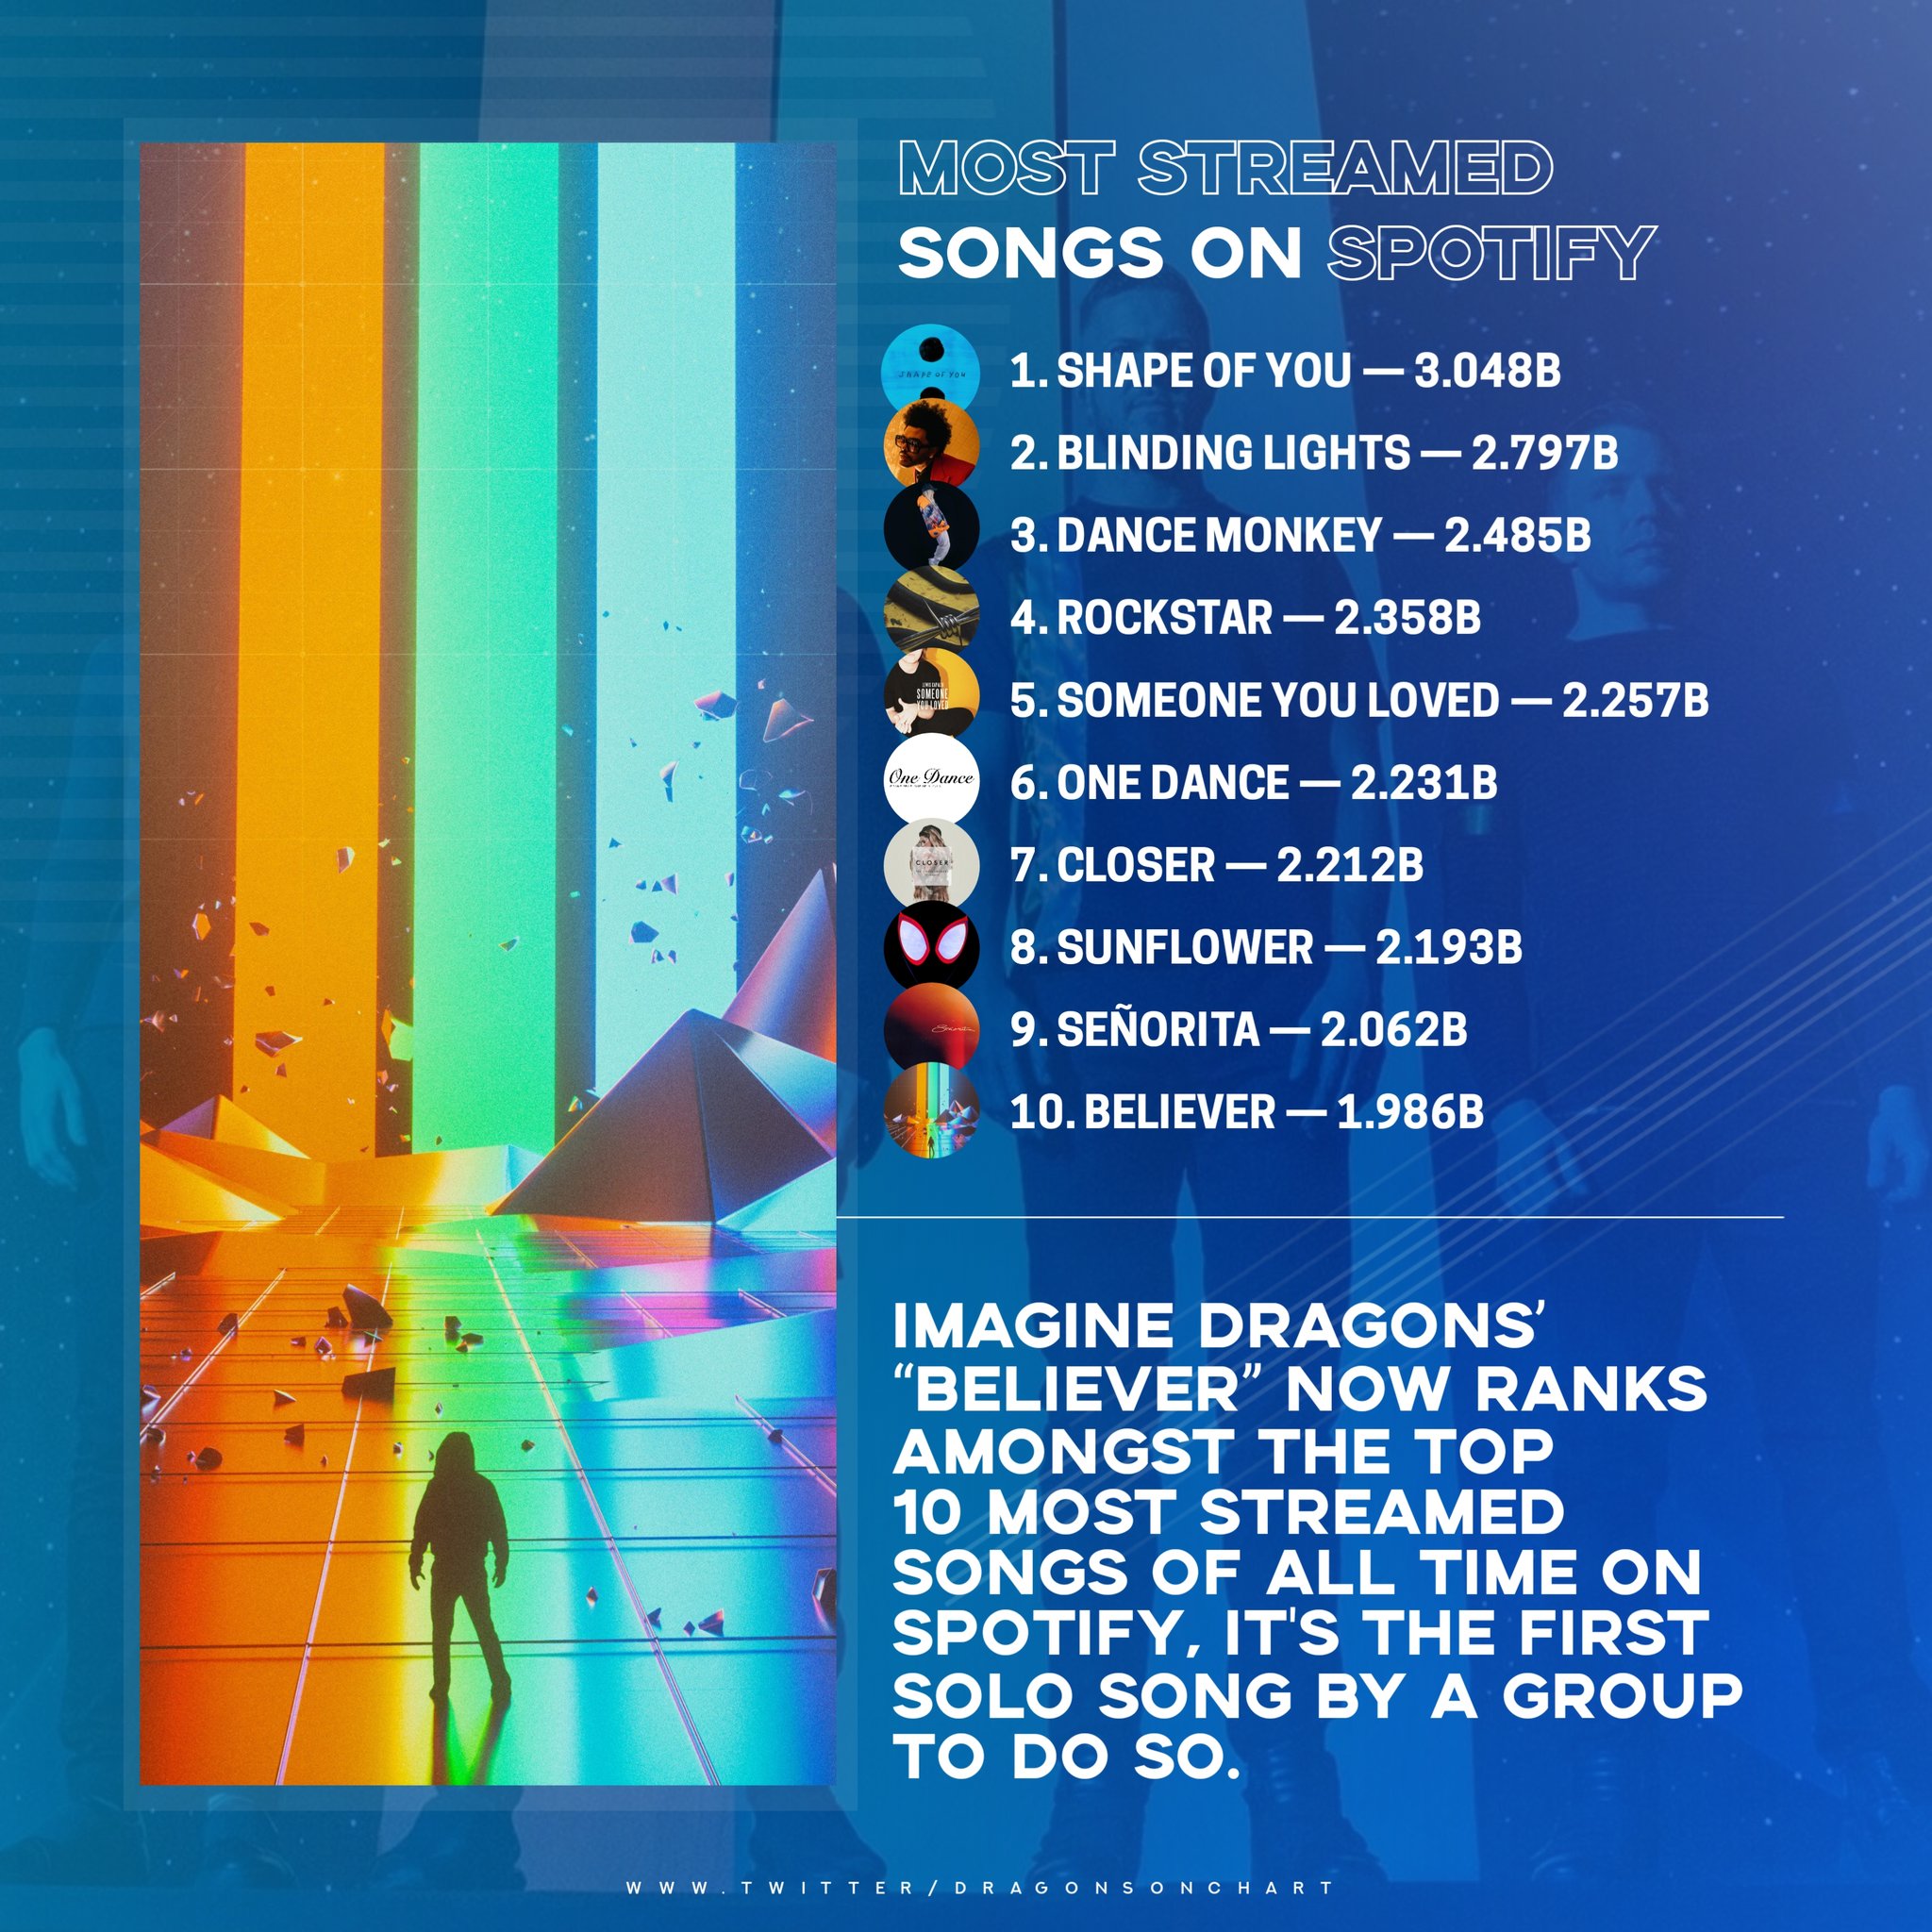 meteor Bærbar sendt Imagine Dragons Charts on Twitter: ".@Imaginedragons' “Believer” now ranks  amongst the top 10 most streamed songs of ALL TIME on Spotify, surpassing  @BillieEilish's “bad guy”. https://t.co/Tg3TCW3q4O" / Twitter